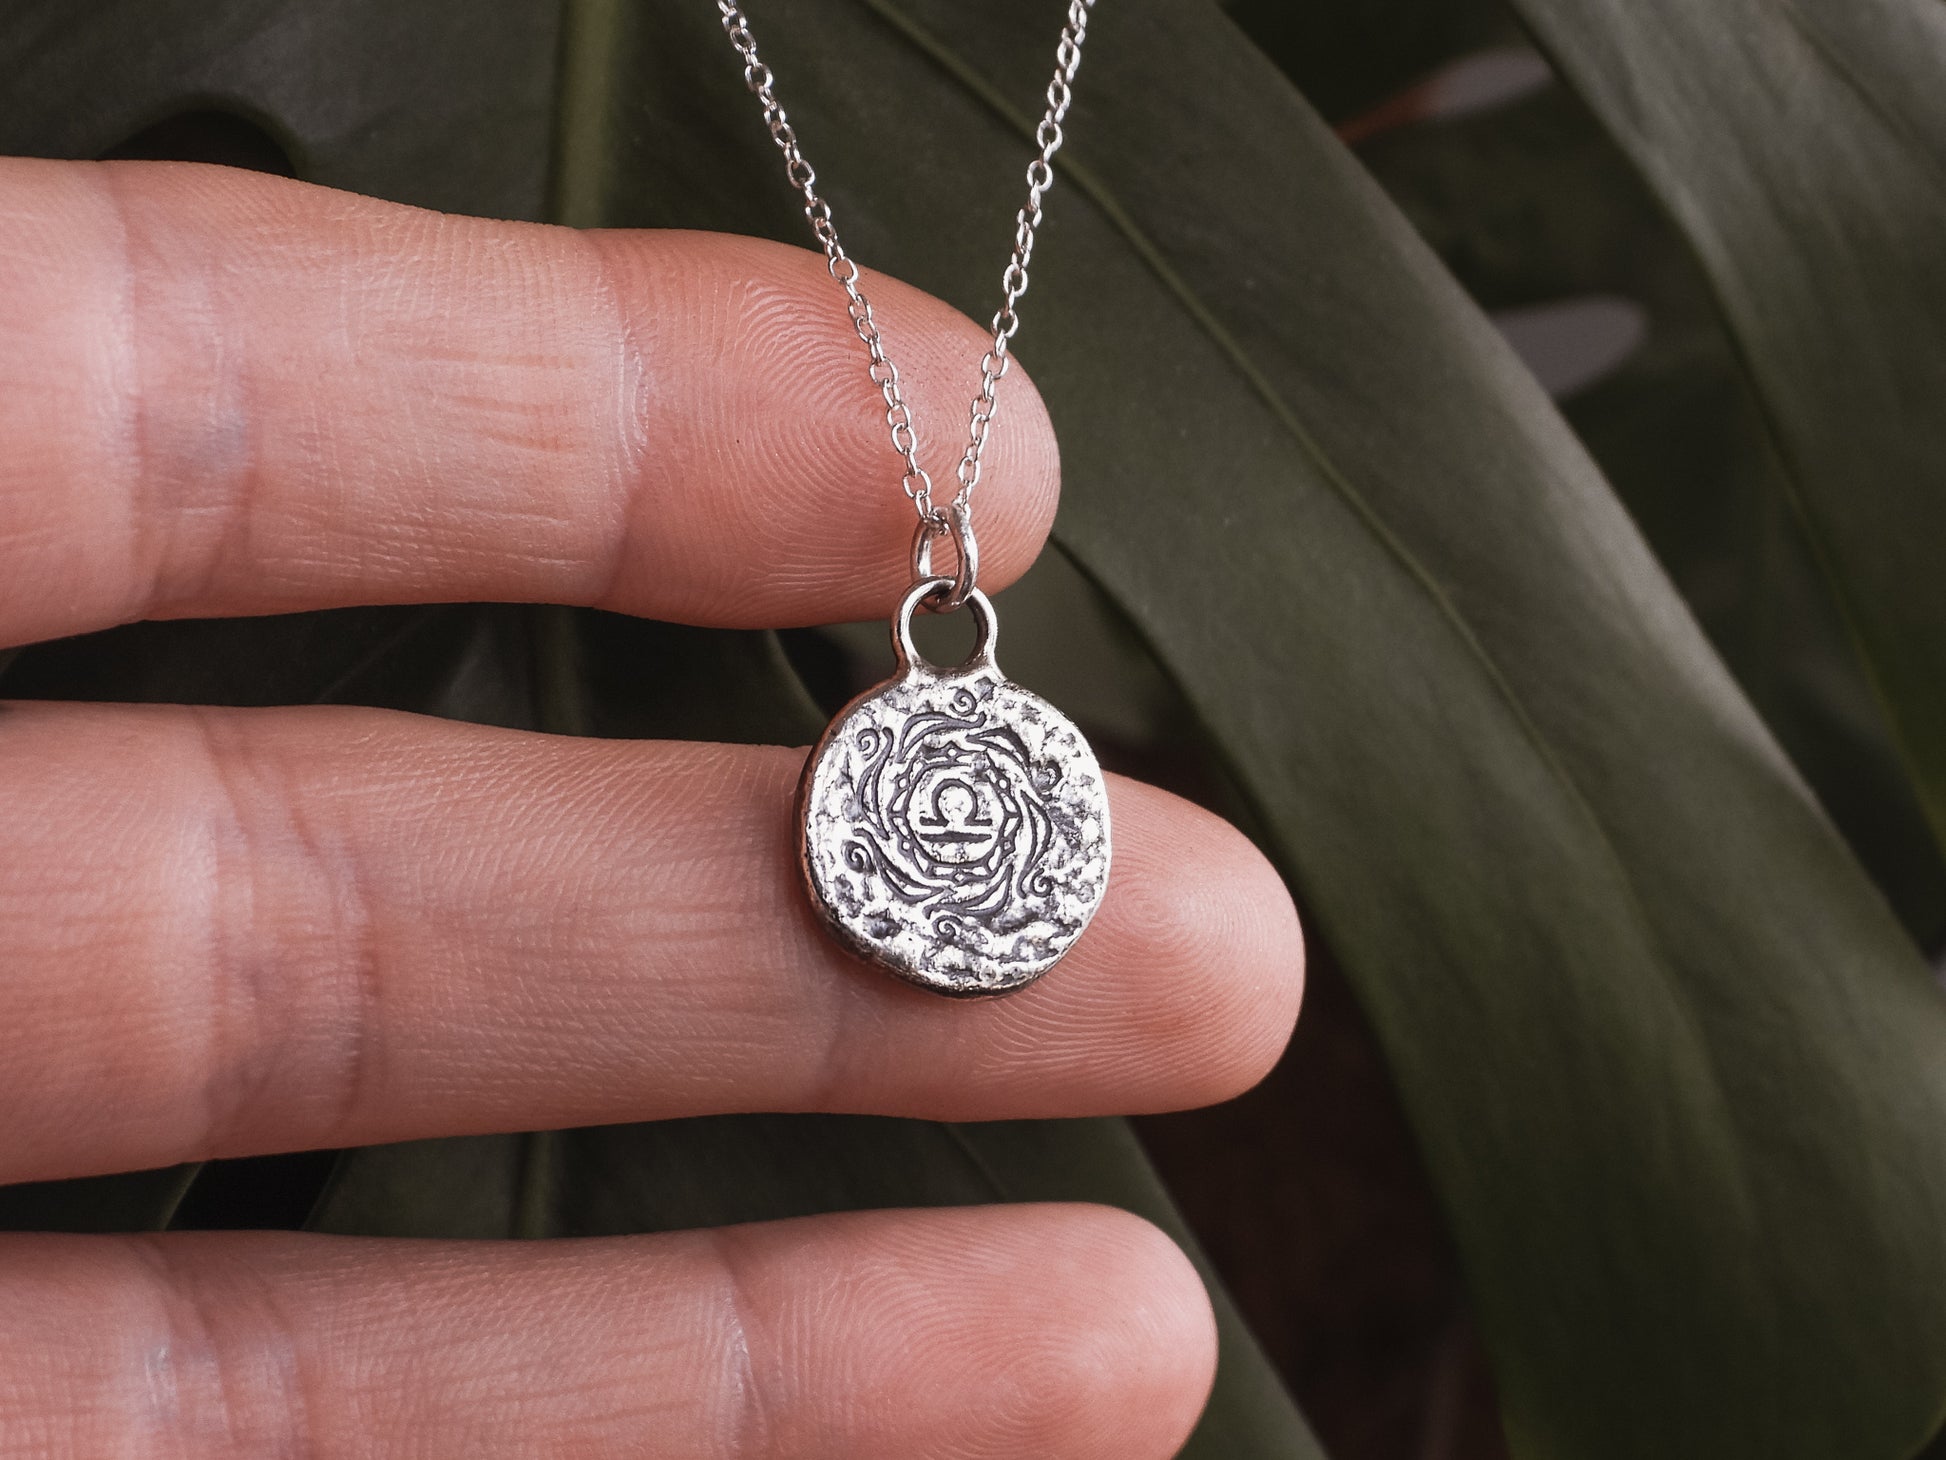 recycled sterling silver boho style medallion pendant with libra symbol